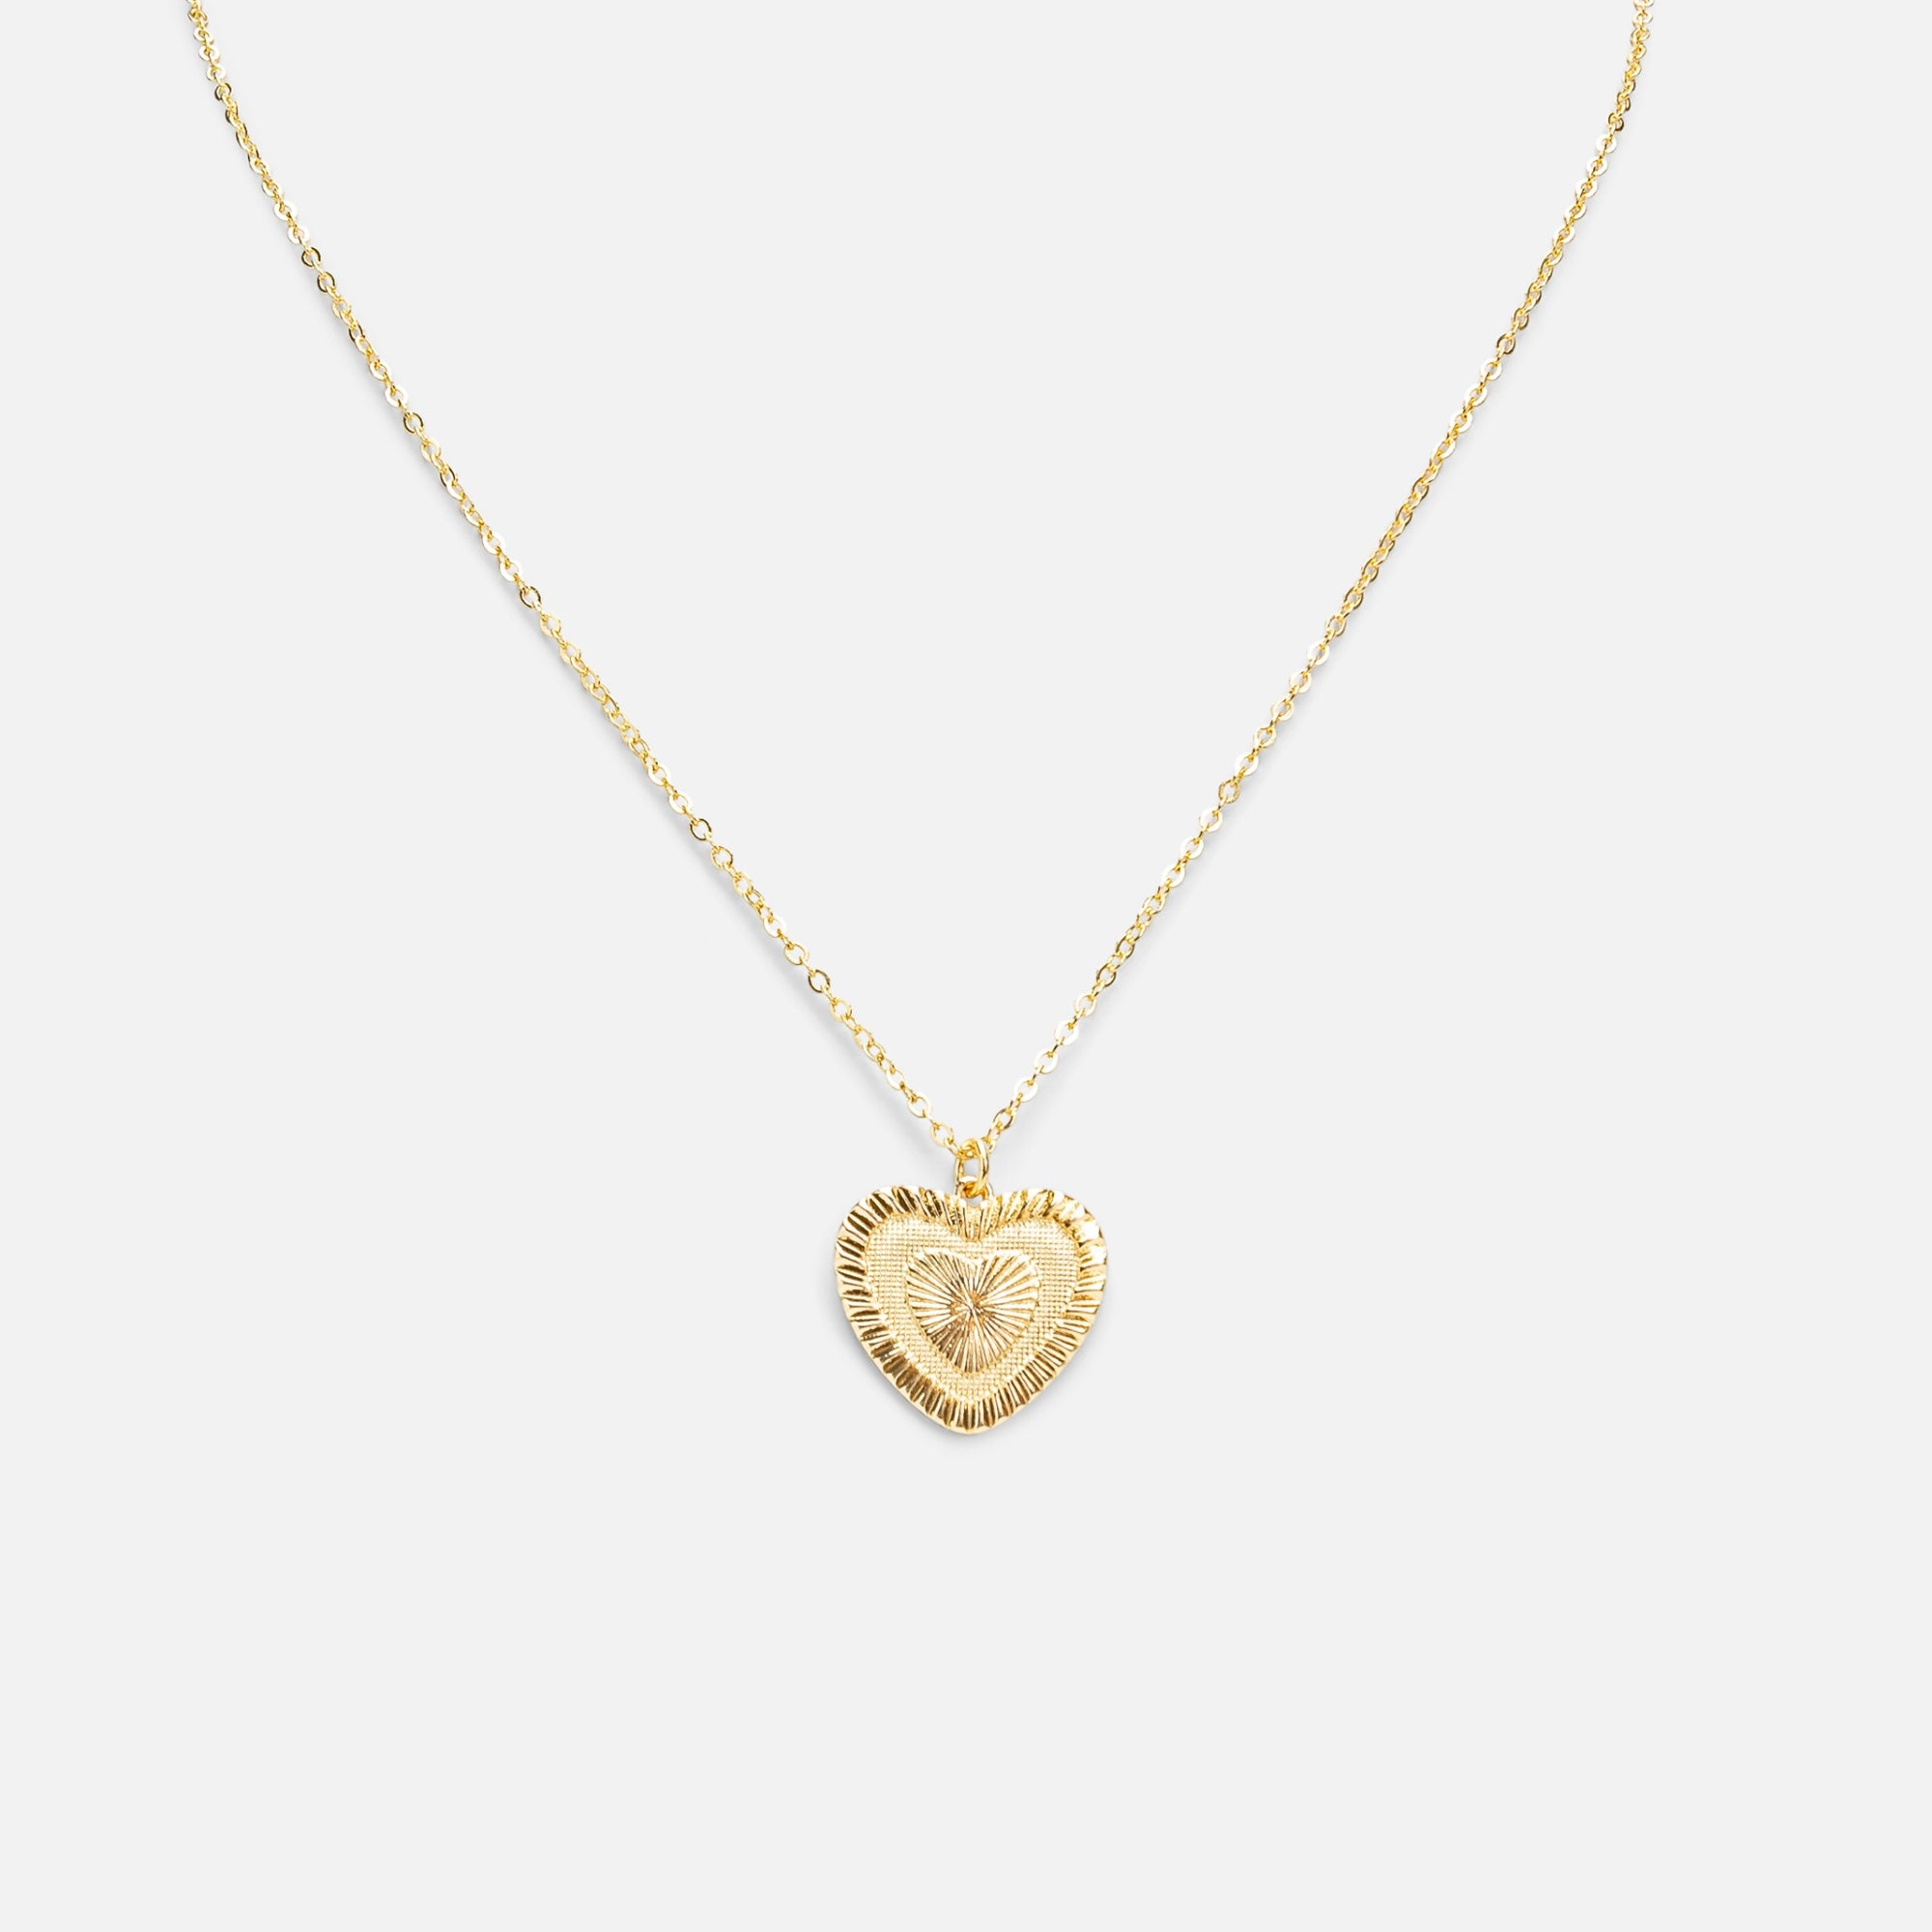 Golden necklace with heart shaped pendant